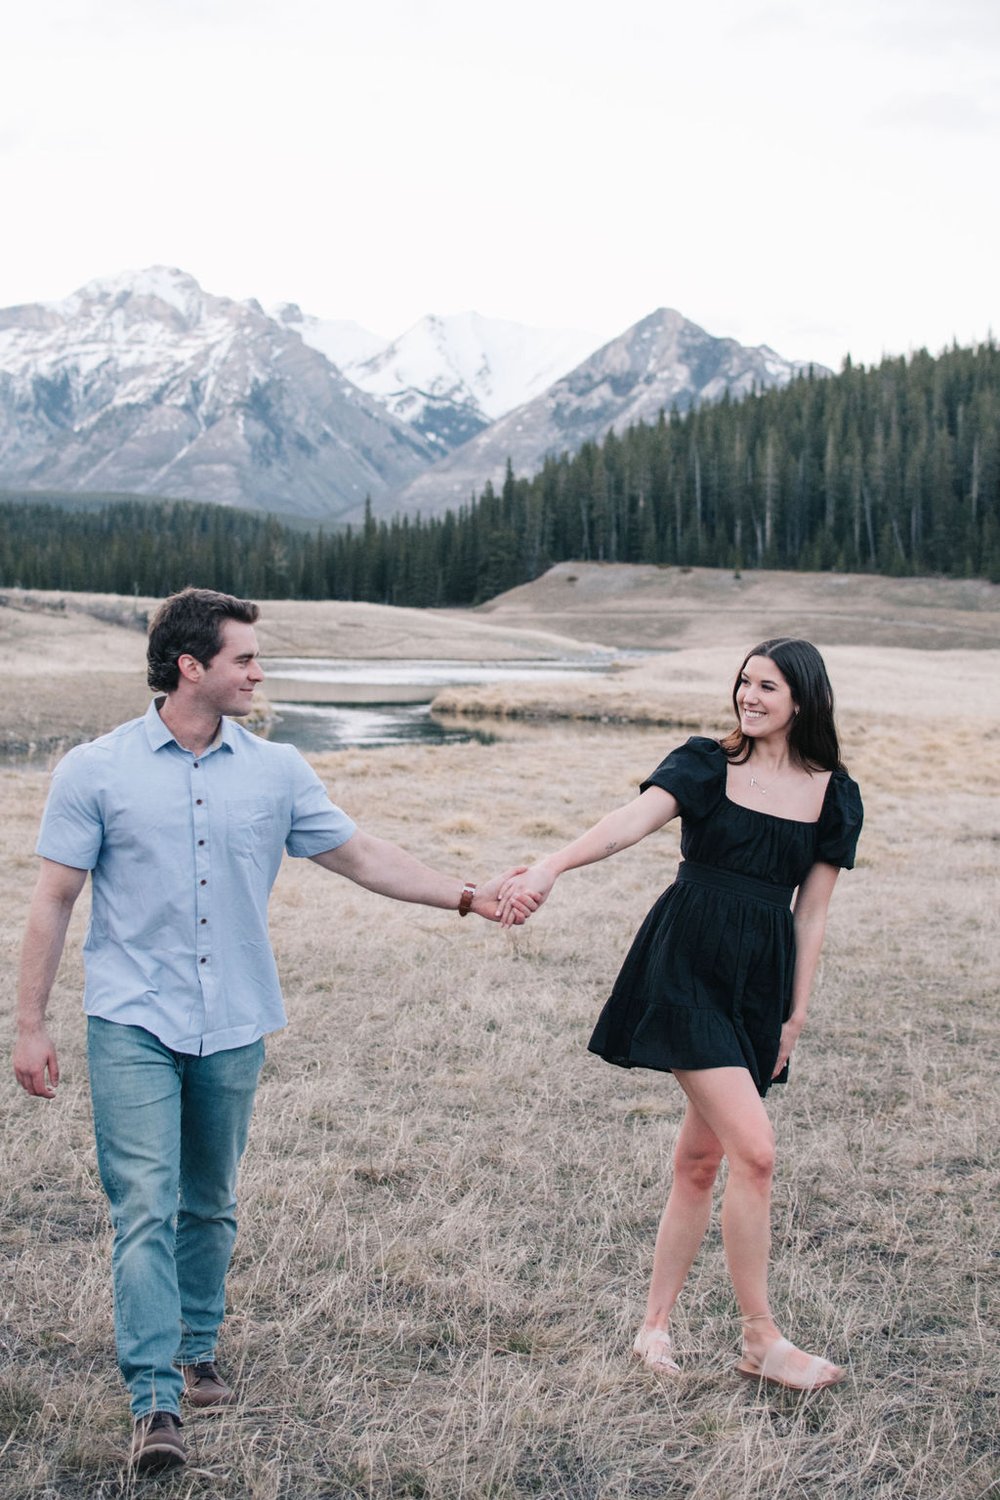 Romantic destination engagement session in Canada's Banff National Park photographed by Niagara wedding photographers, Ugo Photography